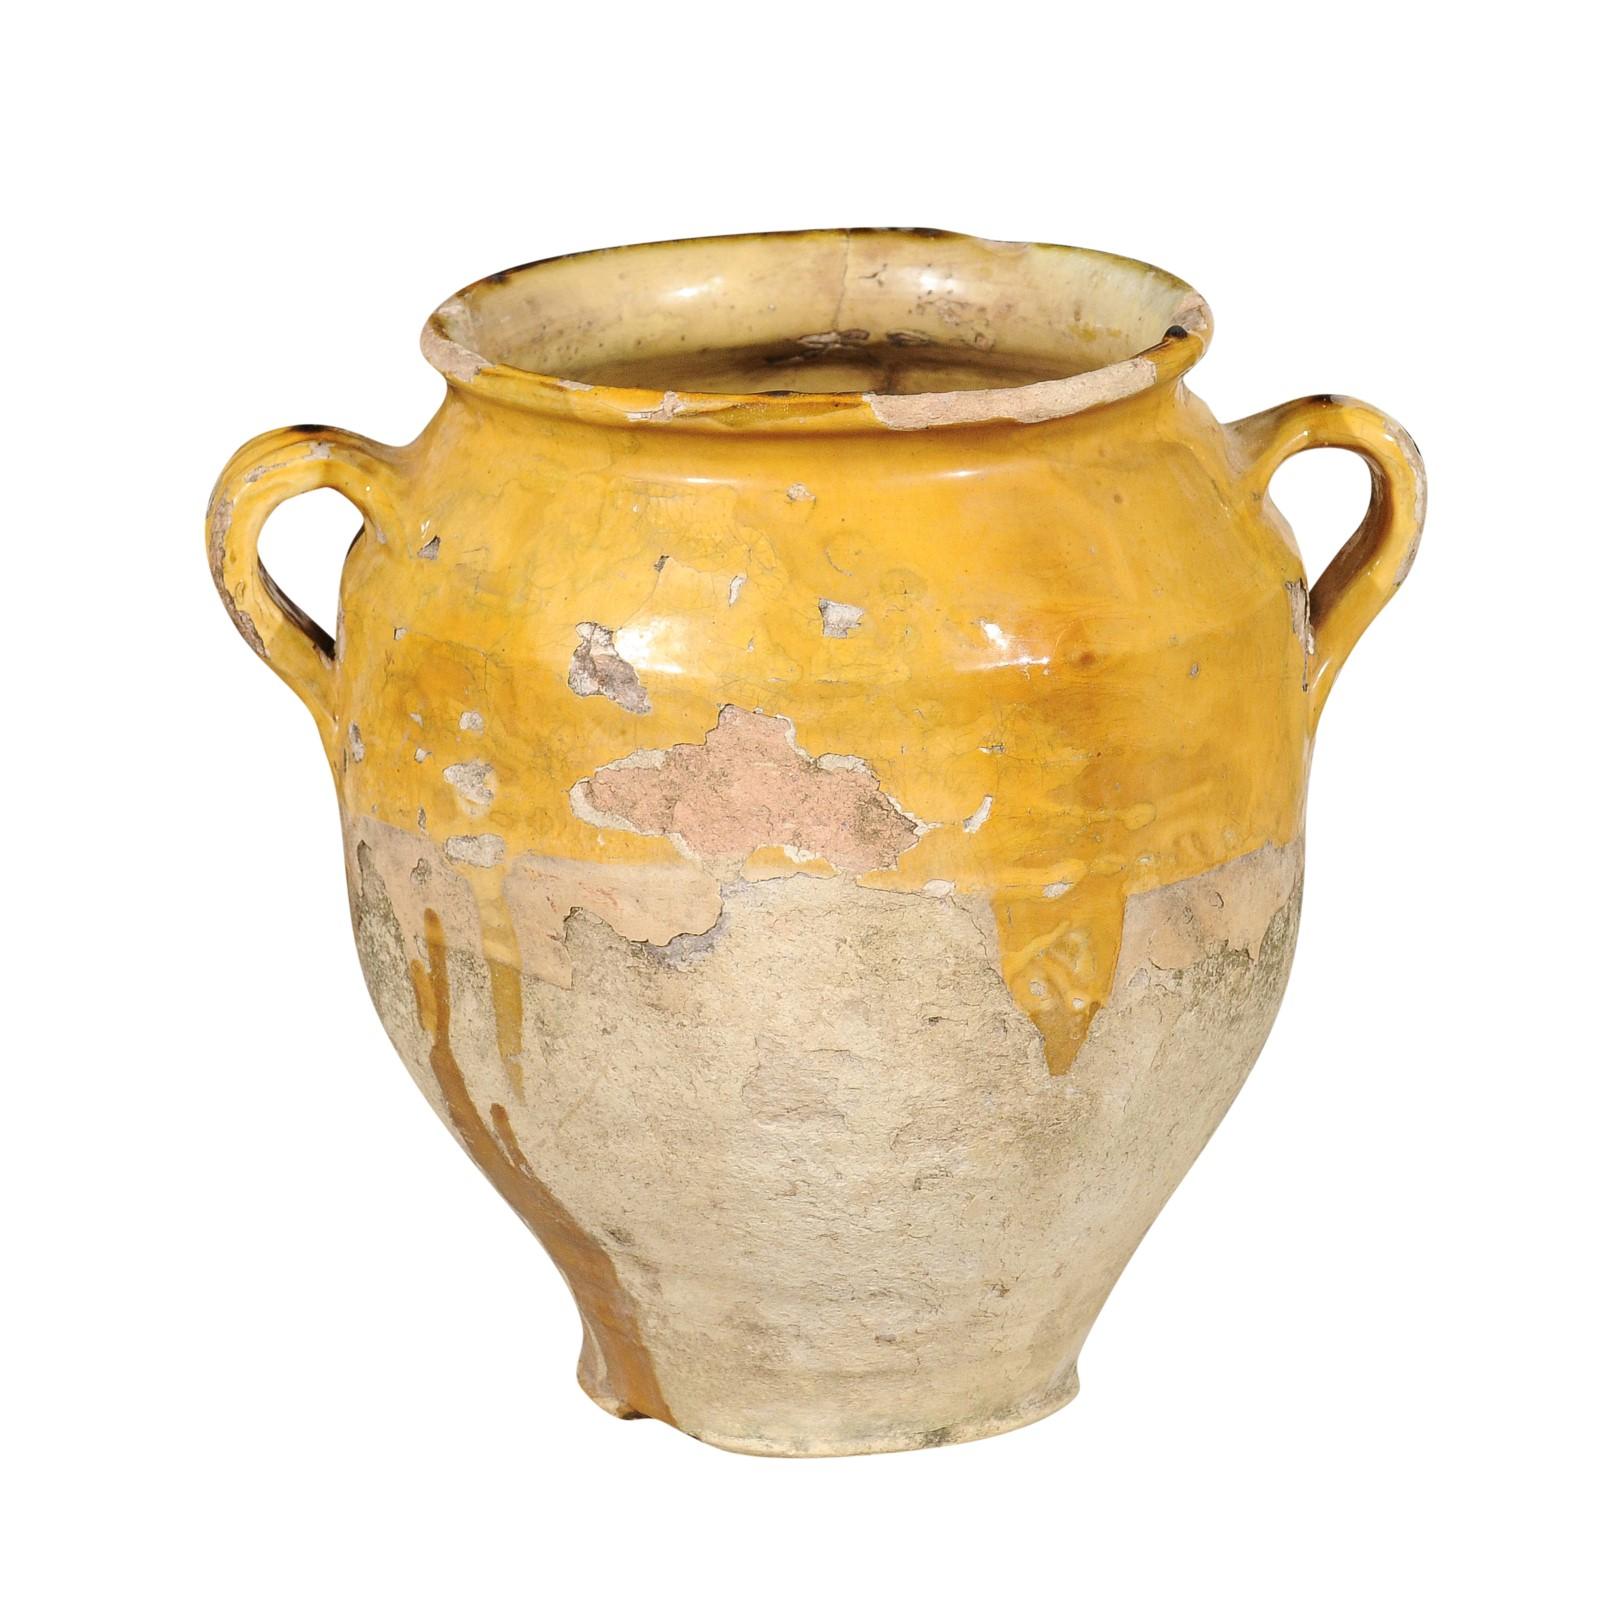 Southern French Yellow Glazed Terracotta Confit Pot with Two Handles, circa 1850